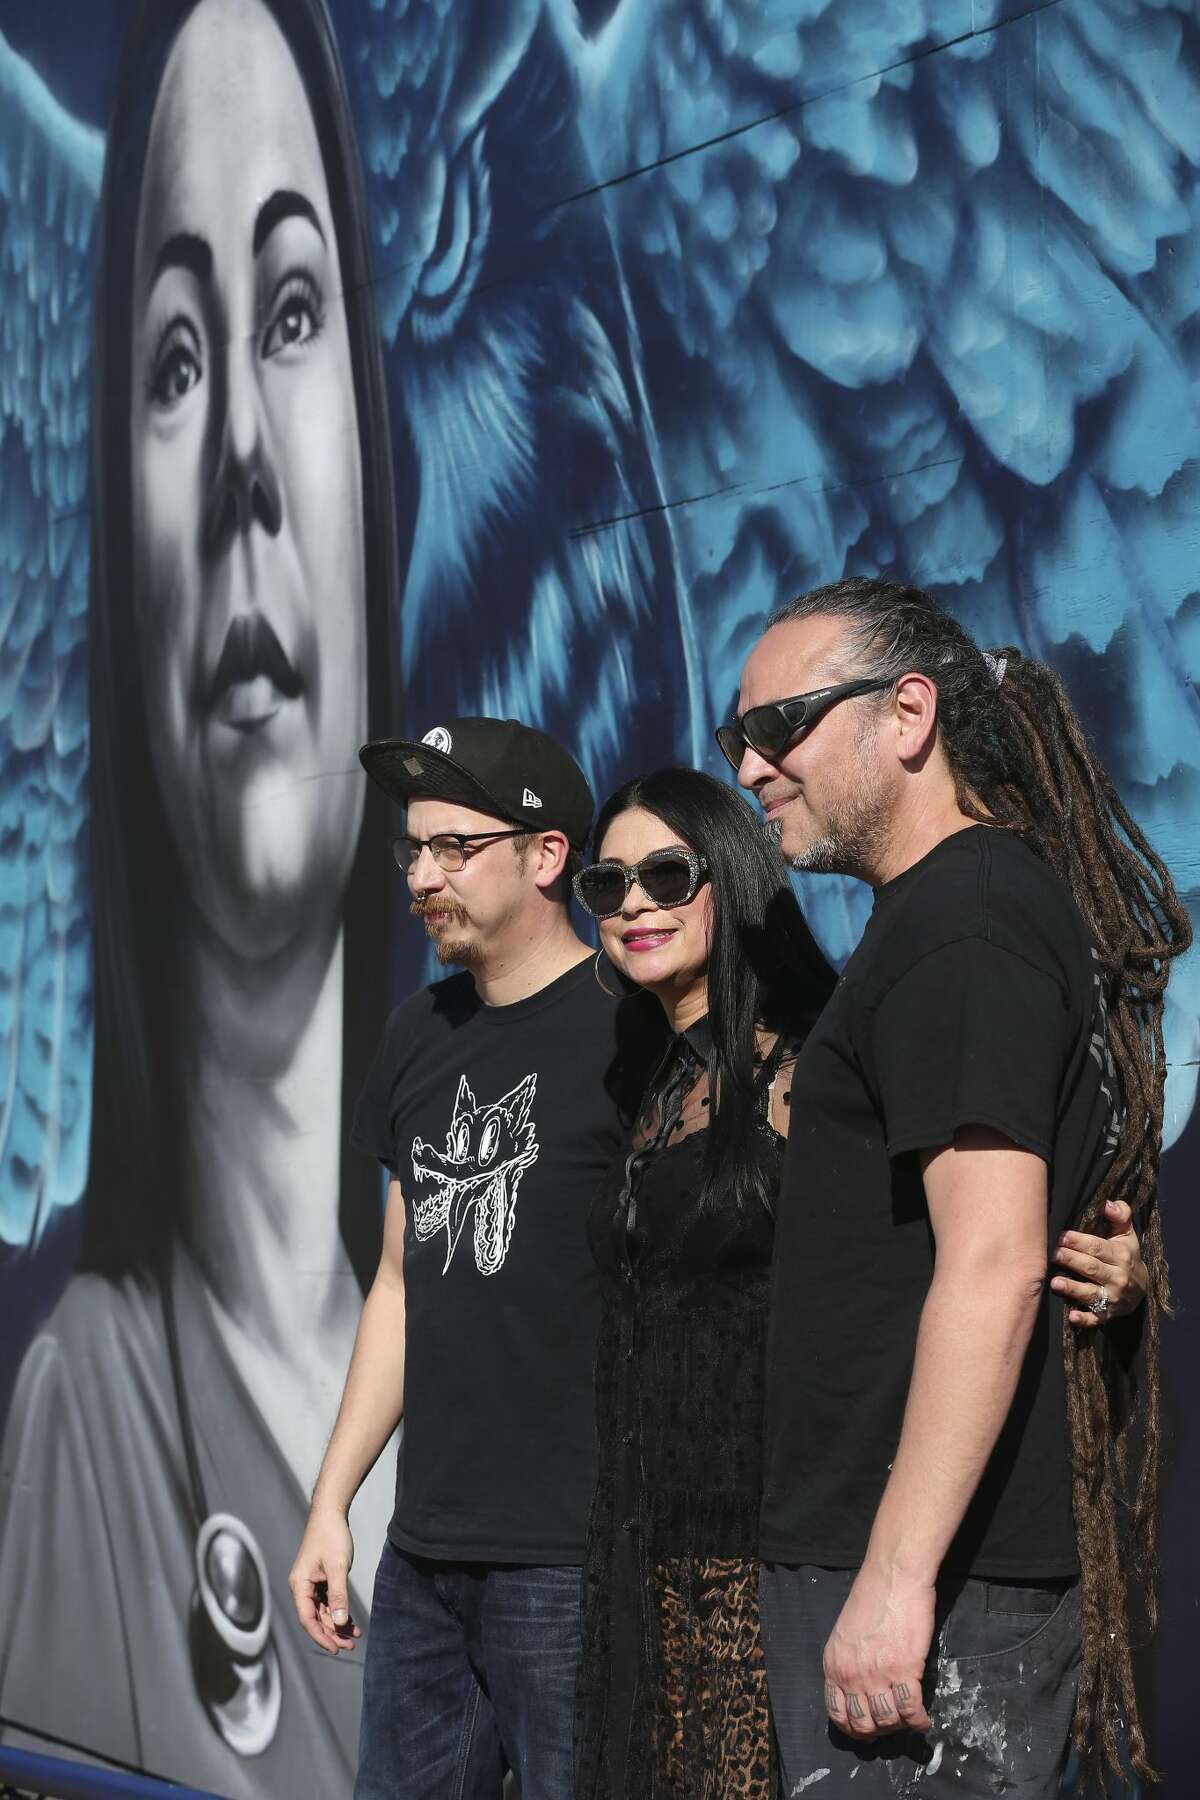 Jacqueline Becerra, a local nursing director, pastor and philanthropist, poses with Los Otros art duo Shek Vega, left, and Nik Soupe as her portrait in a mural is unveiled on the side of Botello Food Store in the cityâs Westside, Sunday, Jan. 26, 2020. The with a mural is located in the underserved area of San Antonio where Becerra grew up. The mural â?“ painted by local street art duo, Los Otros â?“ is intended to inspire others in similar circumstances to reach their full potential. It was commissioned as part of Western Governors University's national "Role Model Murals" project. On the left is her husband Pastor Henry Becerra.